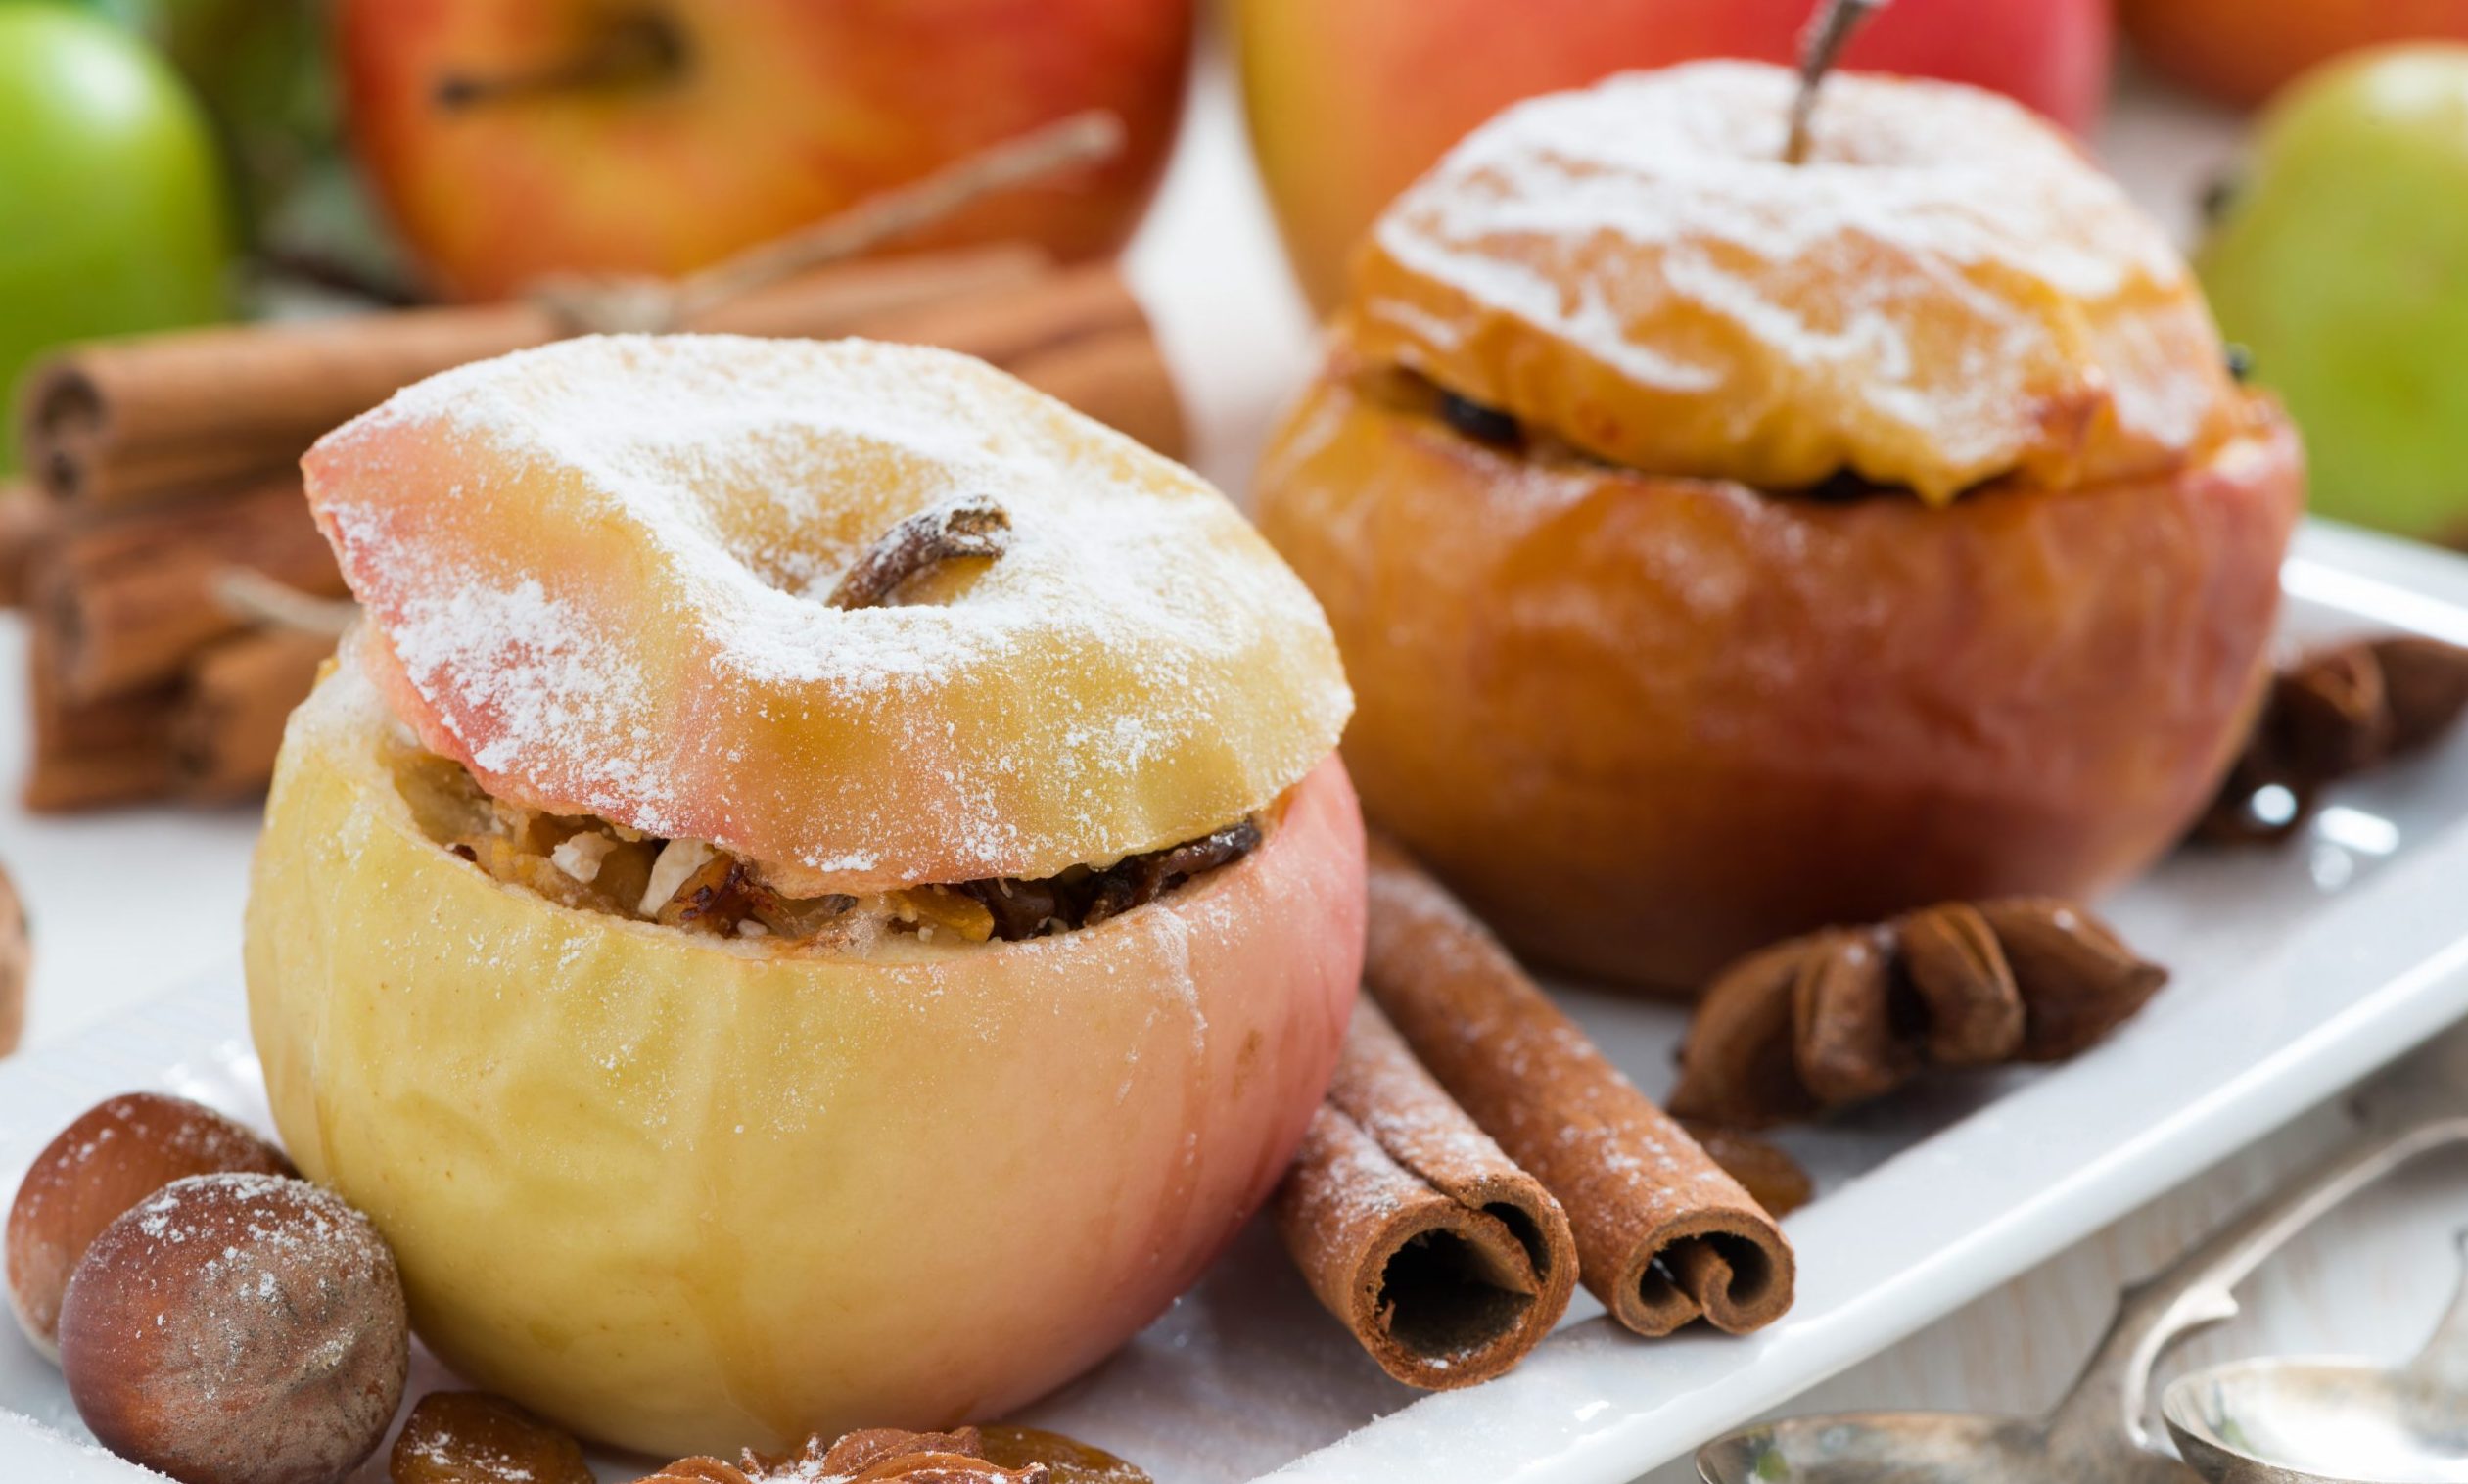 baked apples stuffed with dried fruit, nuts and cottage cheese o